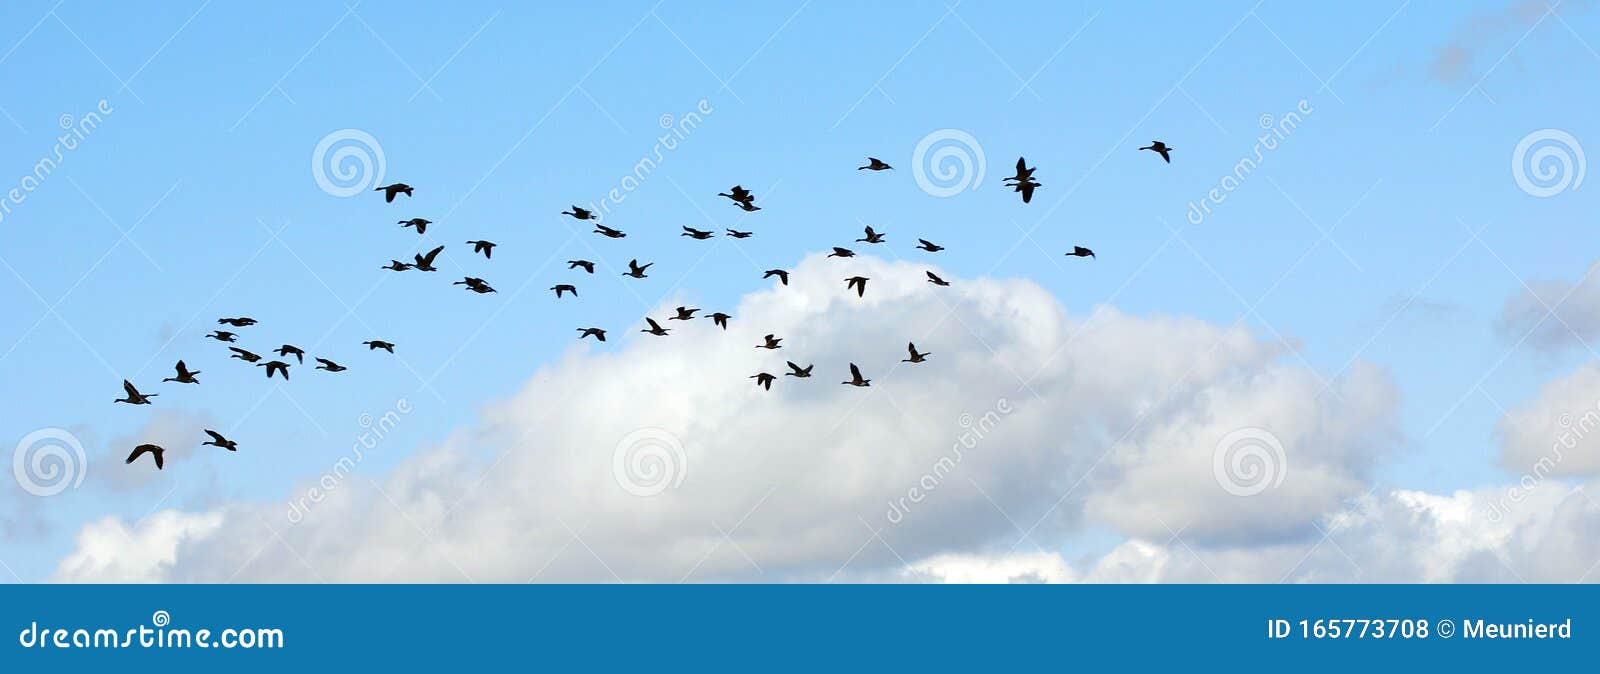 geese migrate each year,